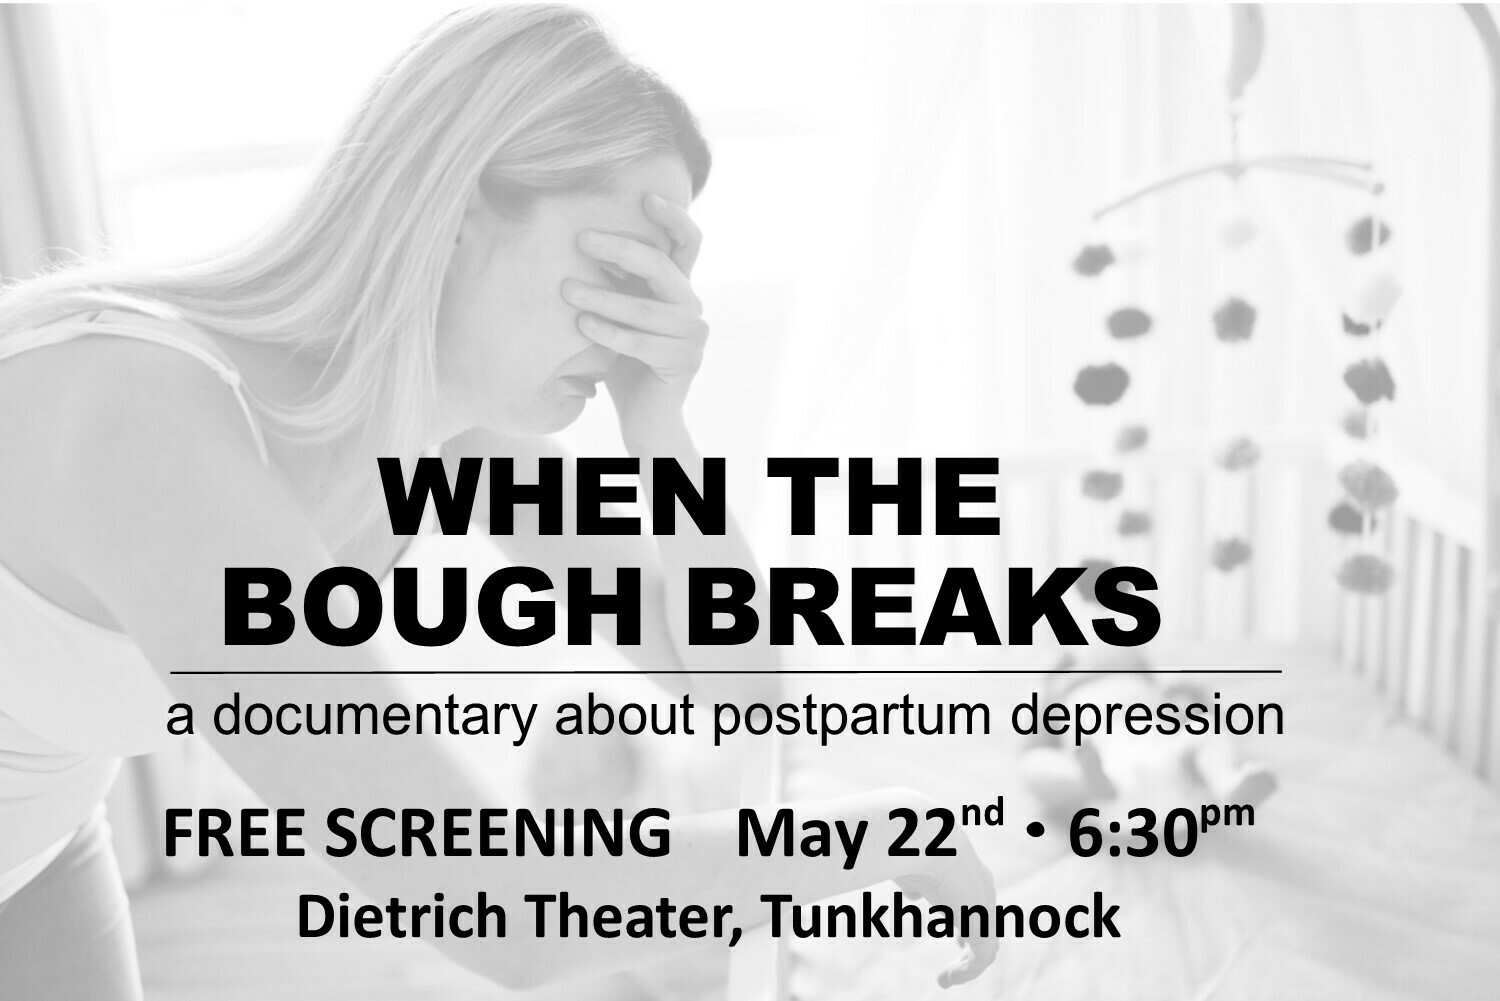 Free Screening: When the Bough Breaks: a documentary about postpartum depression, Tunkhannock, Pennsylvania, United States